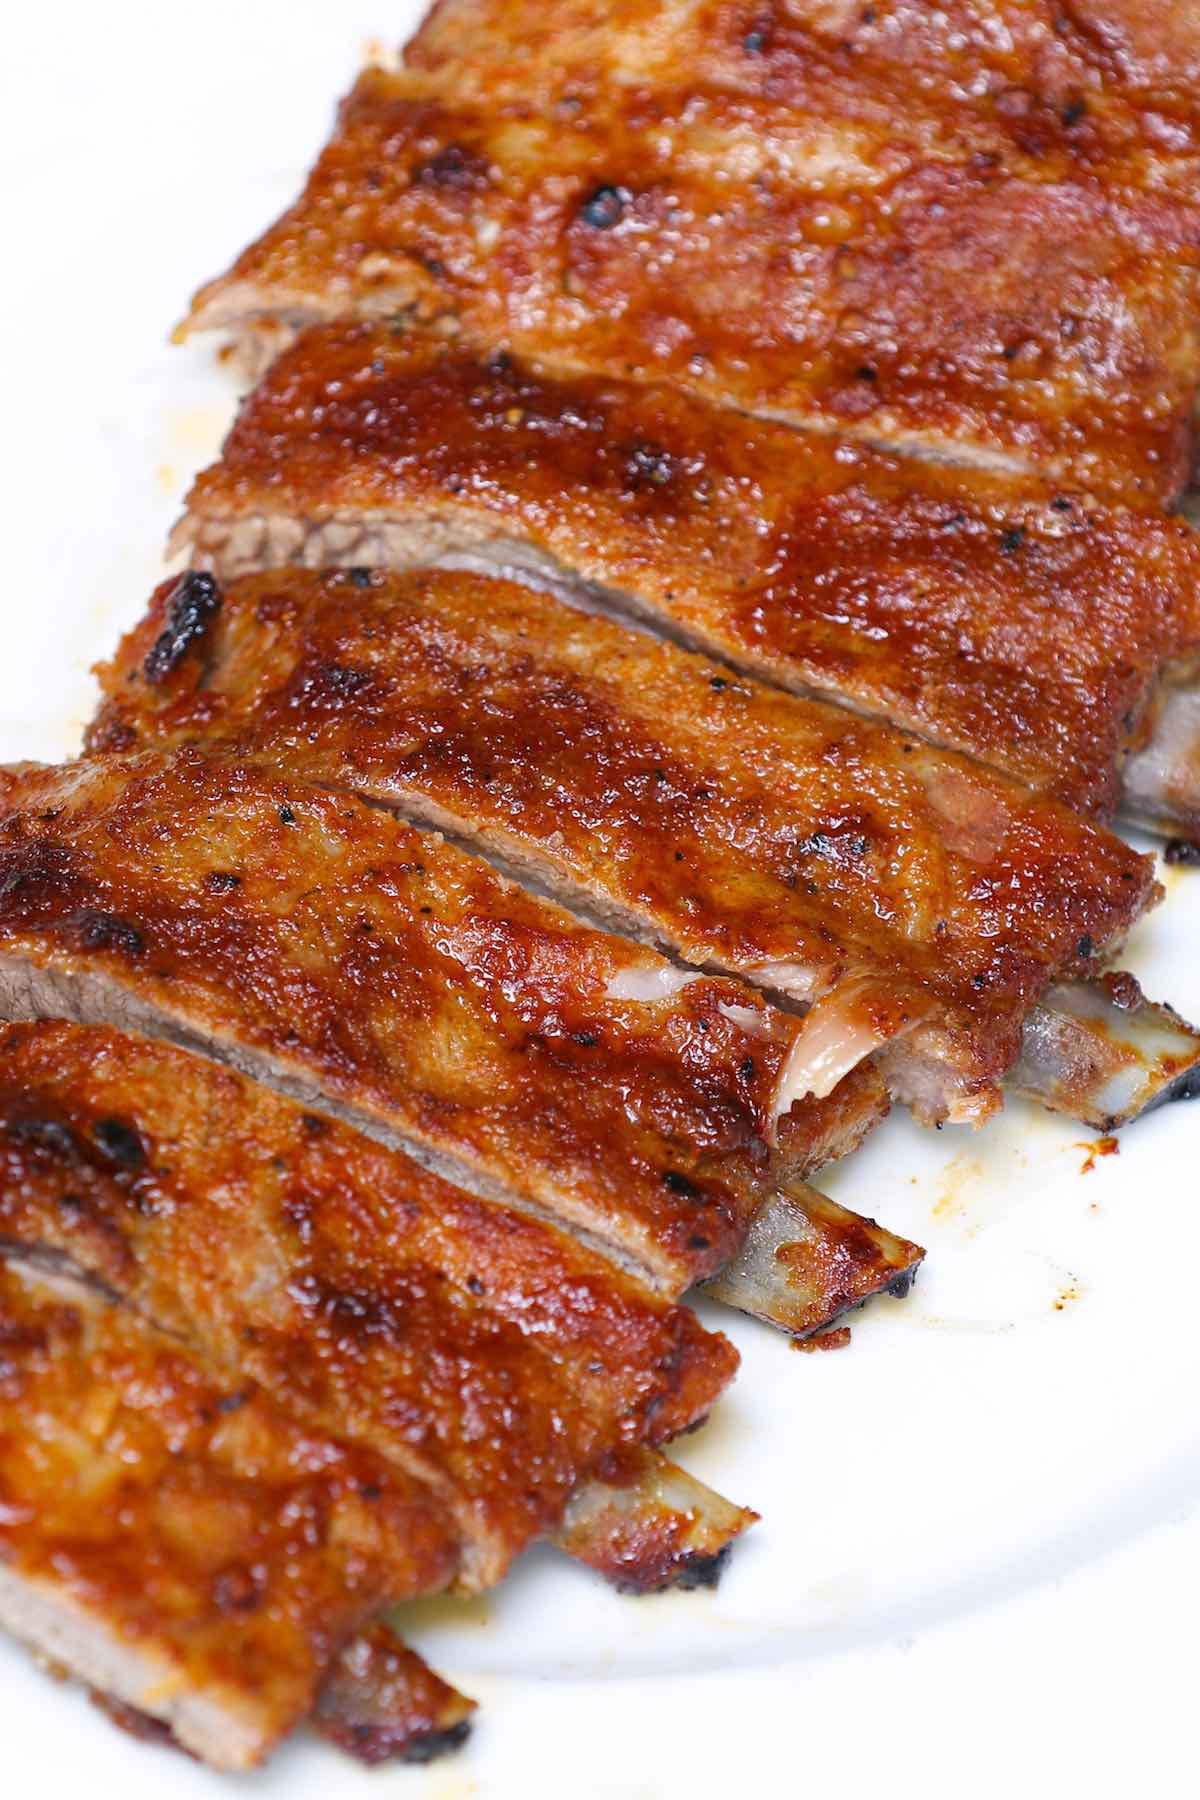 Perfectly cooked spare ribs with the bone sticking out a half-inch from the meat